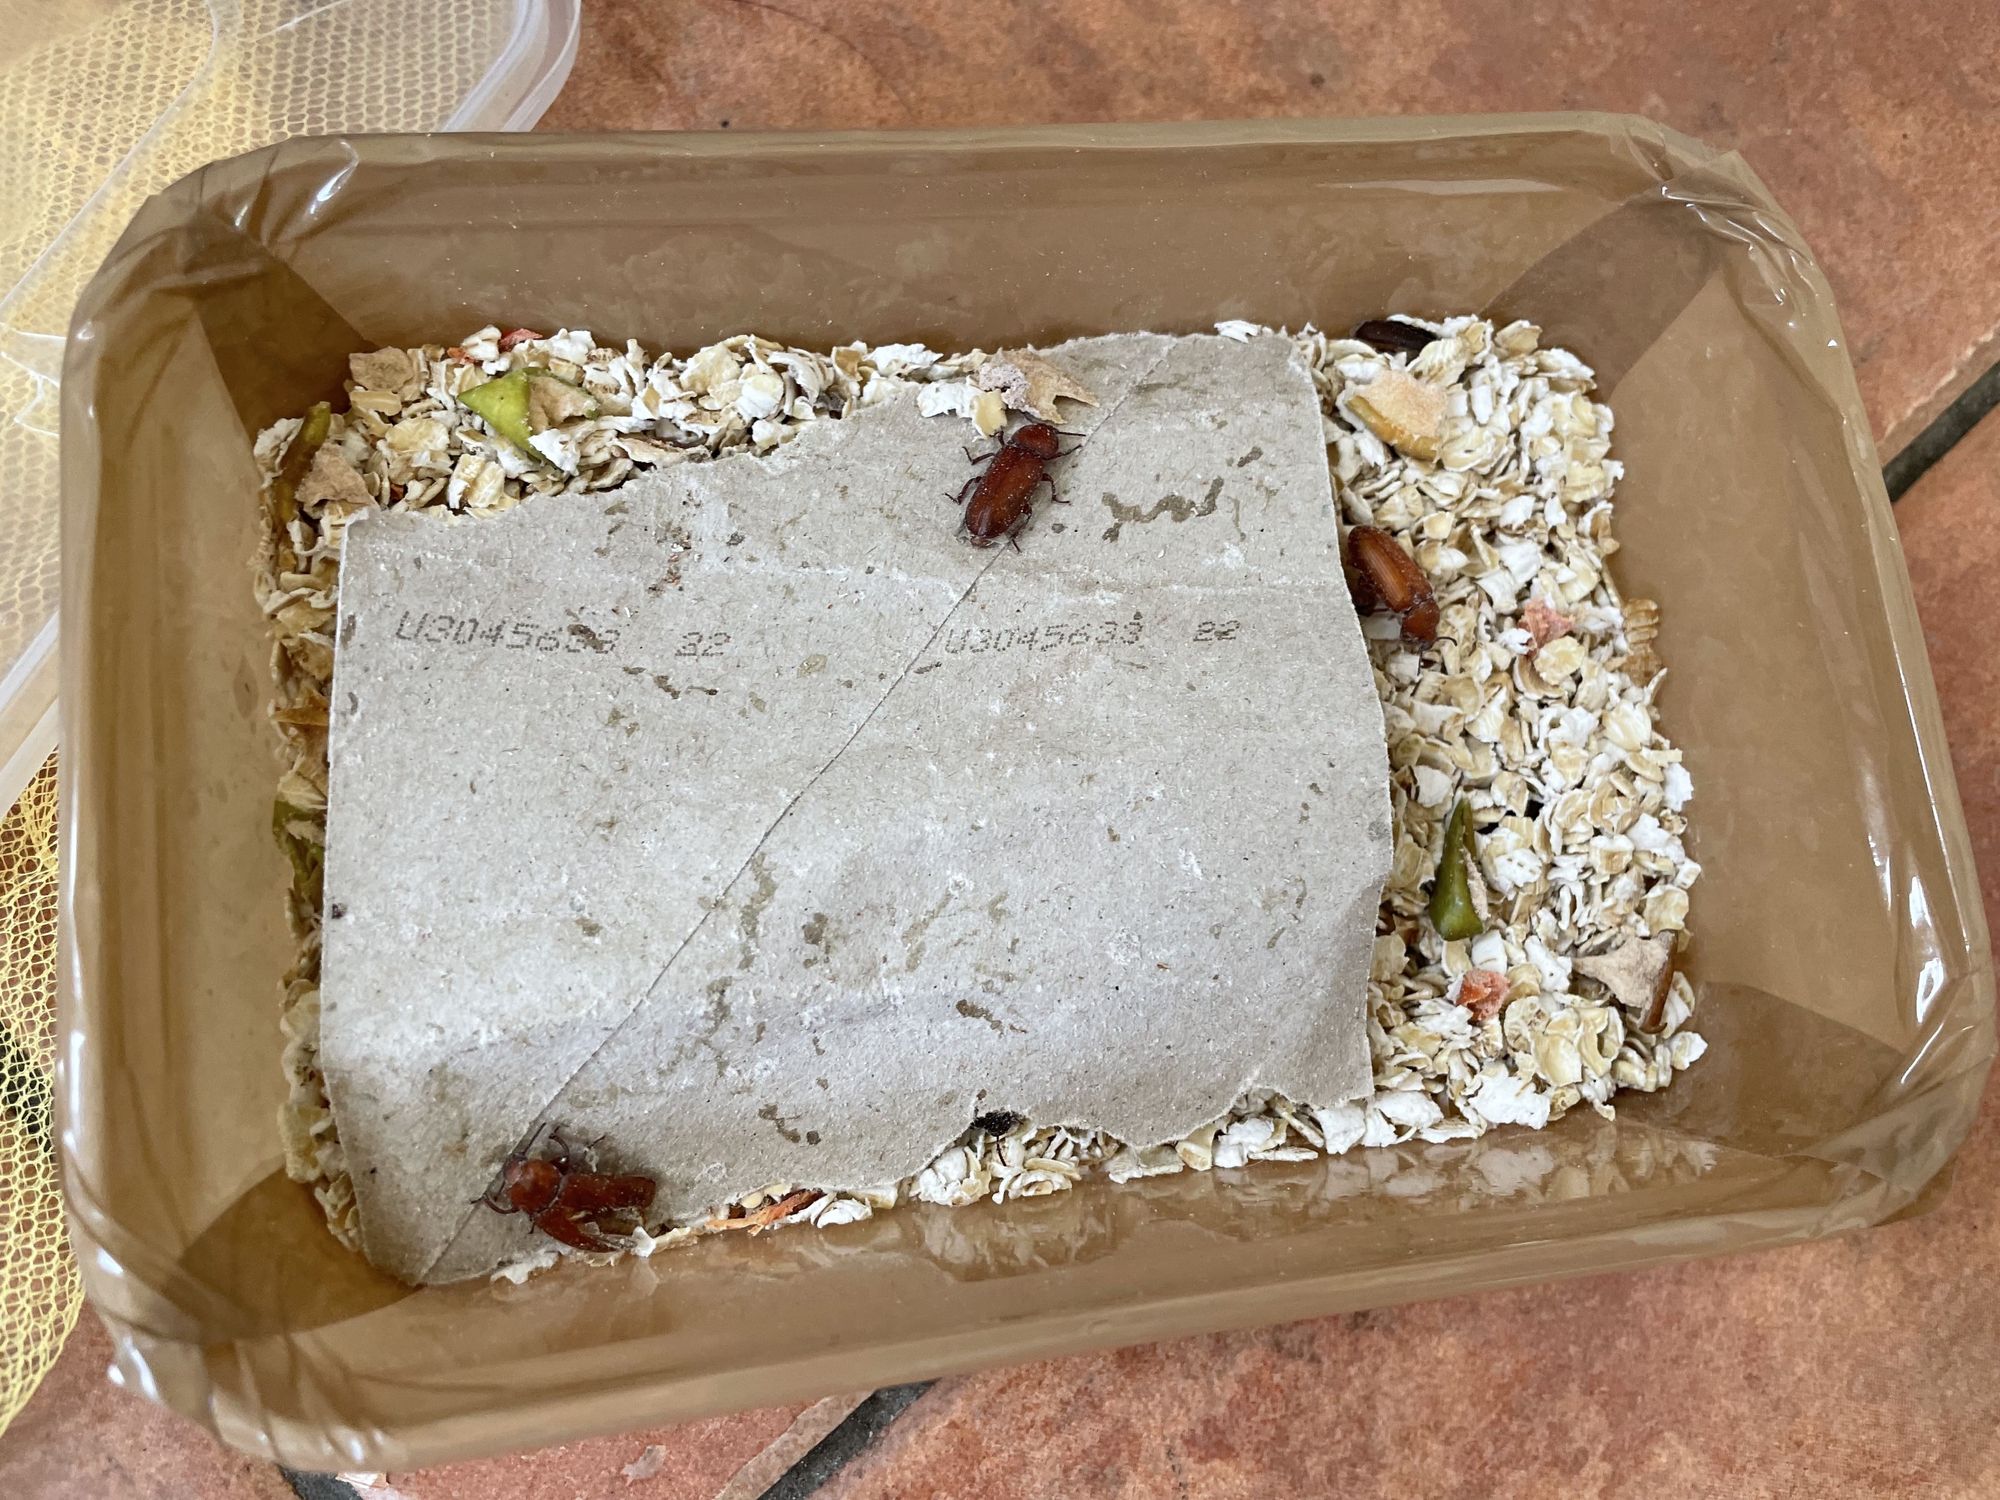 Takeaway box filled with oats and three brown bugs running over a piece of cardboard